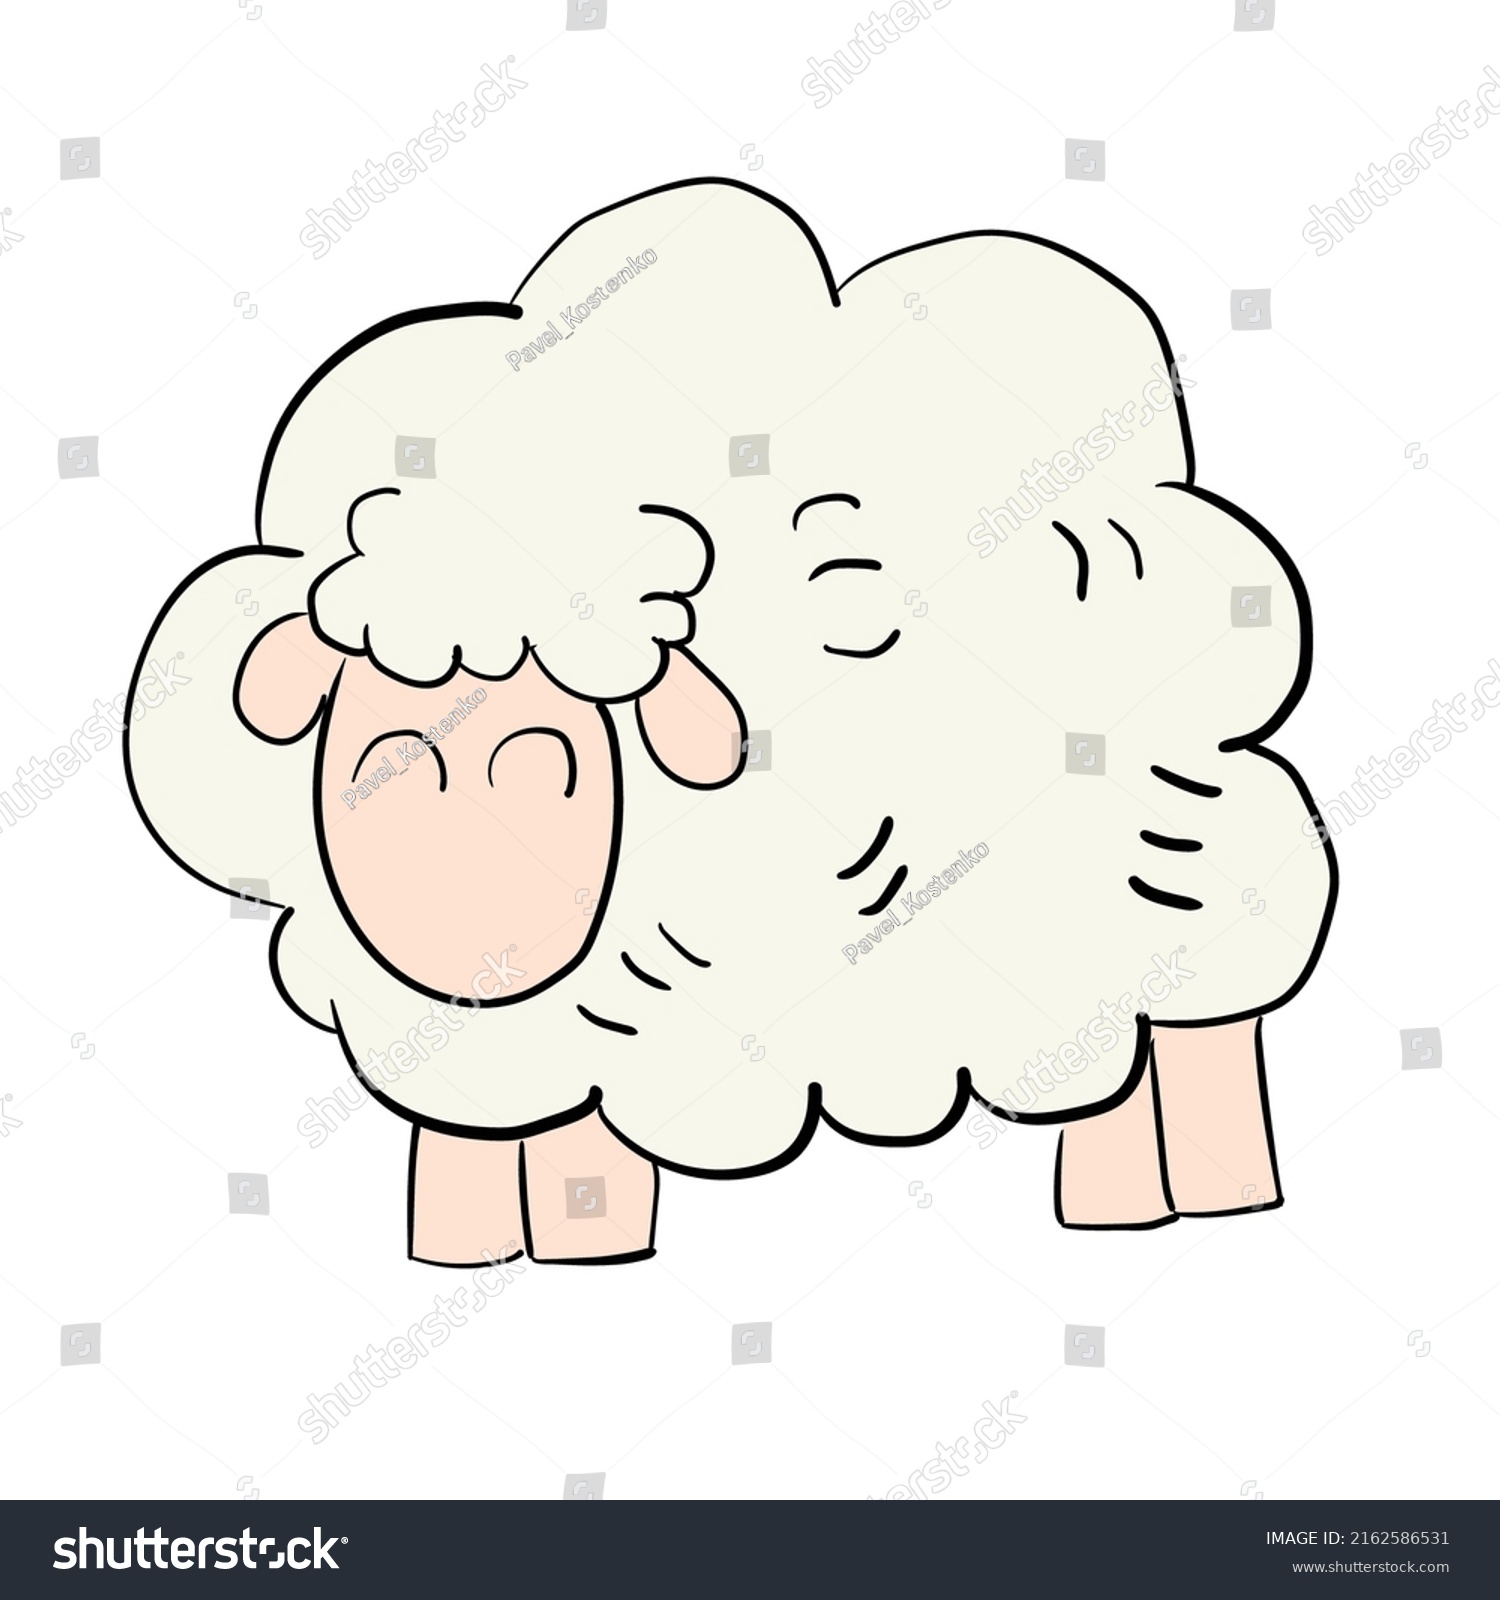 Cute Cartoon Sheep Hand Drawn Isolated Stock Vector Royalty Free 2162586531 Shutterstock 